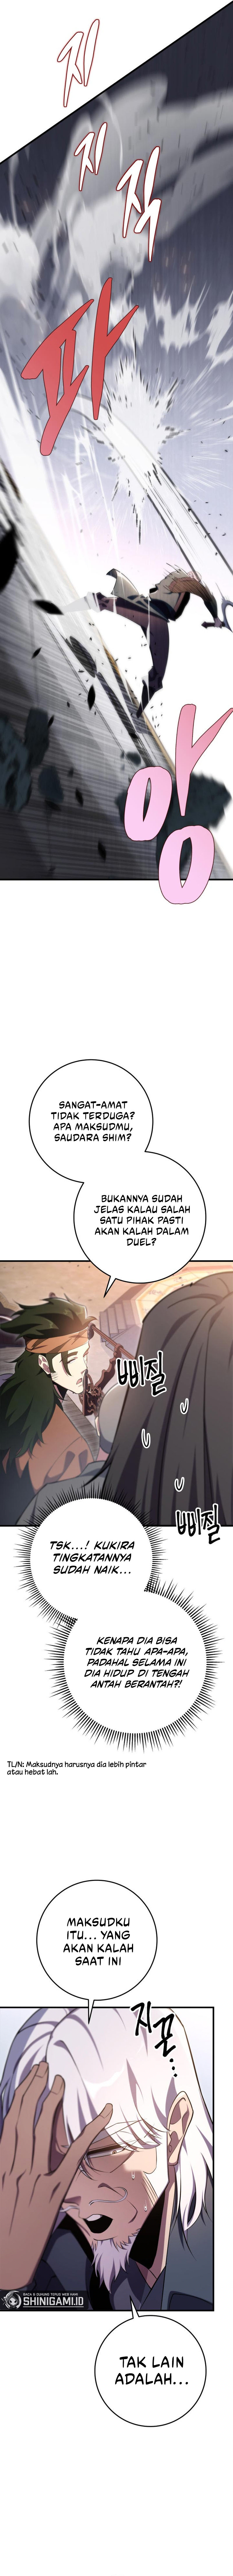 Heavenly Inquisition Sword Chapter 44 16